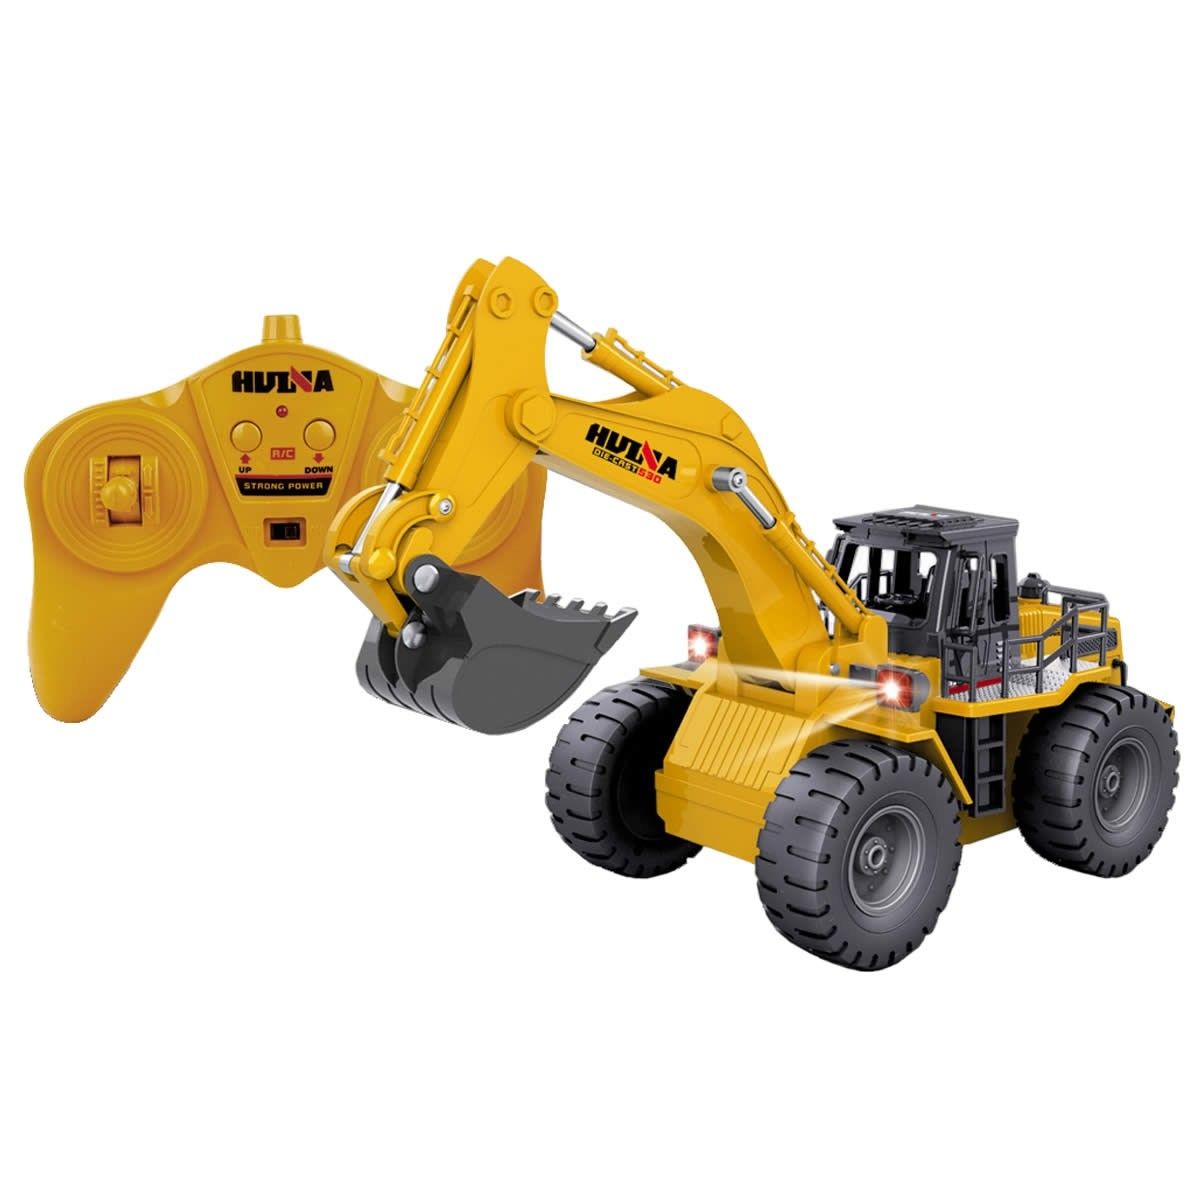 RC Remote Controlled 2.4GHz Die-Cast Excavator Digger Toy